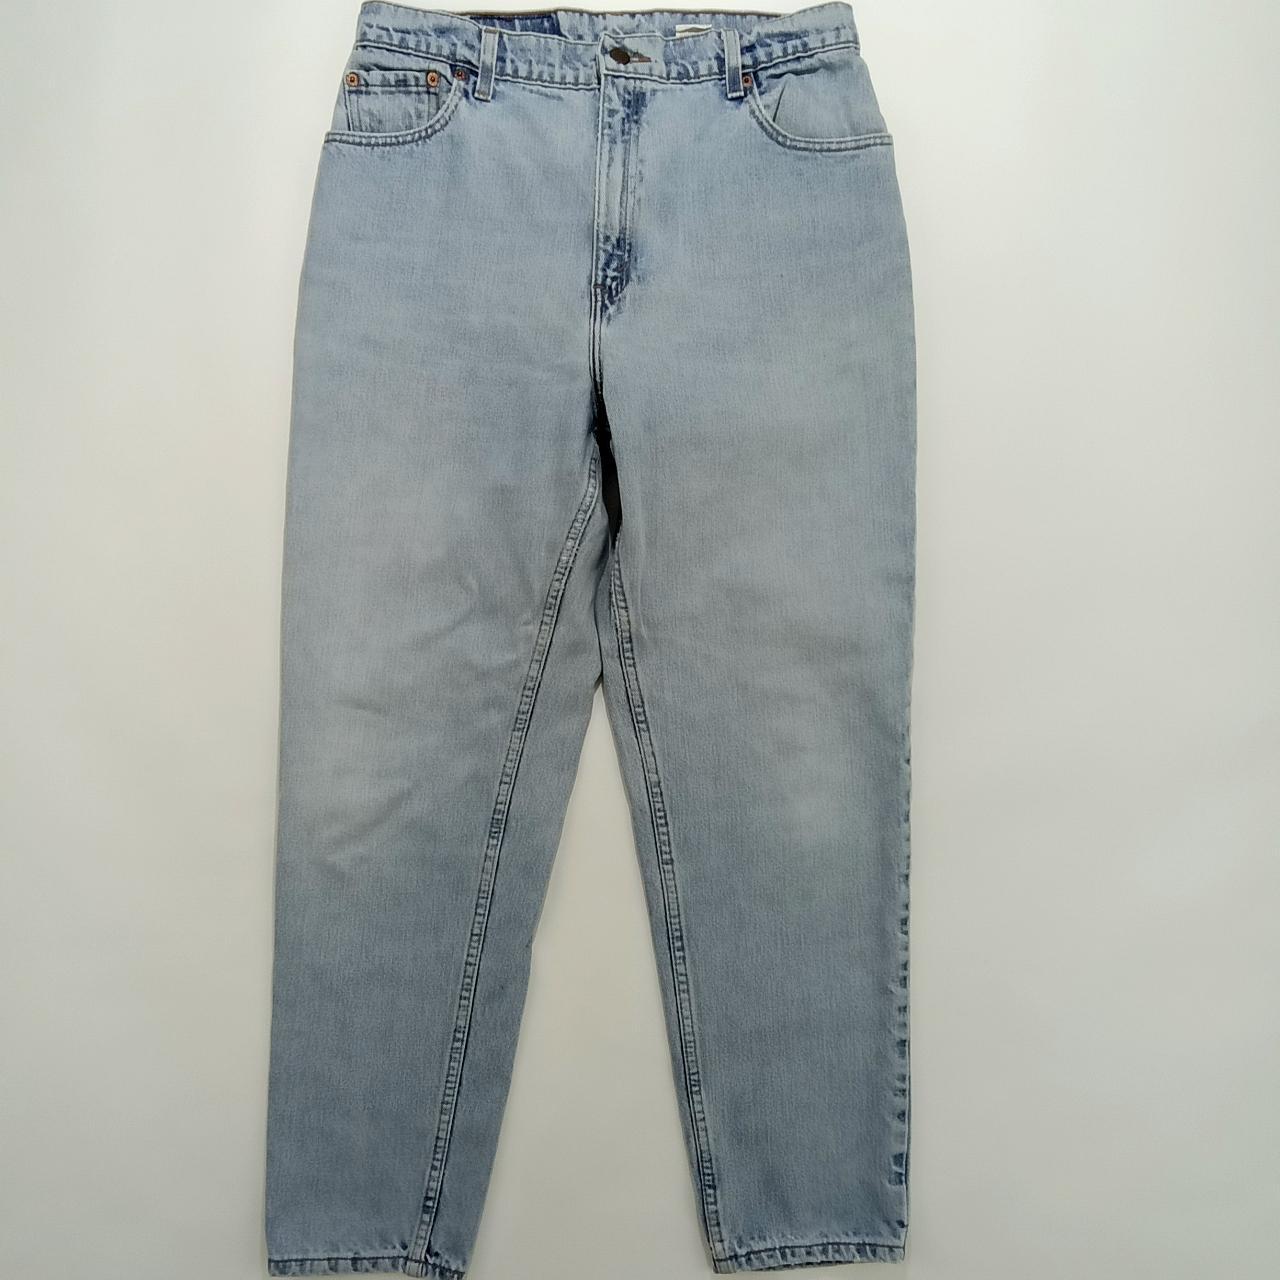 Vintage Levi's 551 Women's Jeans Relaxed Tapered Leg... - Depop